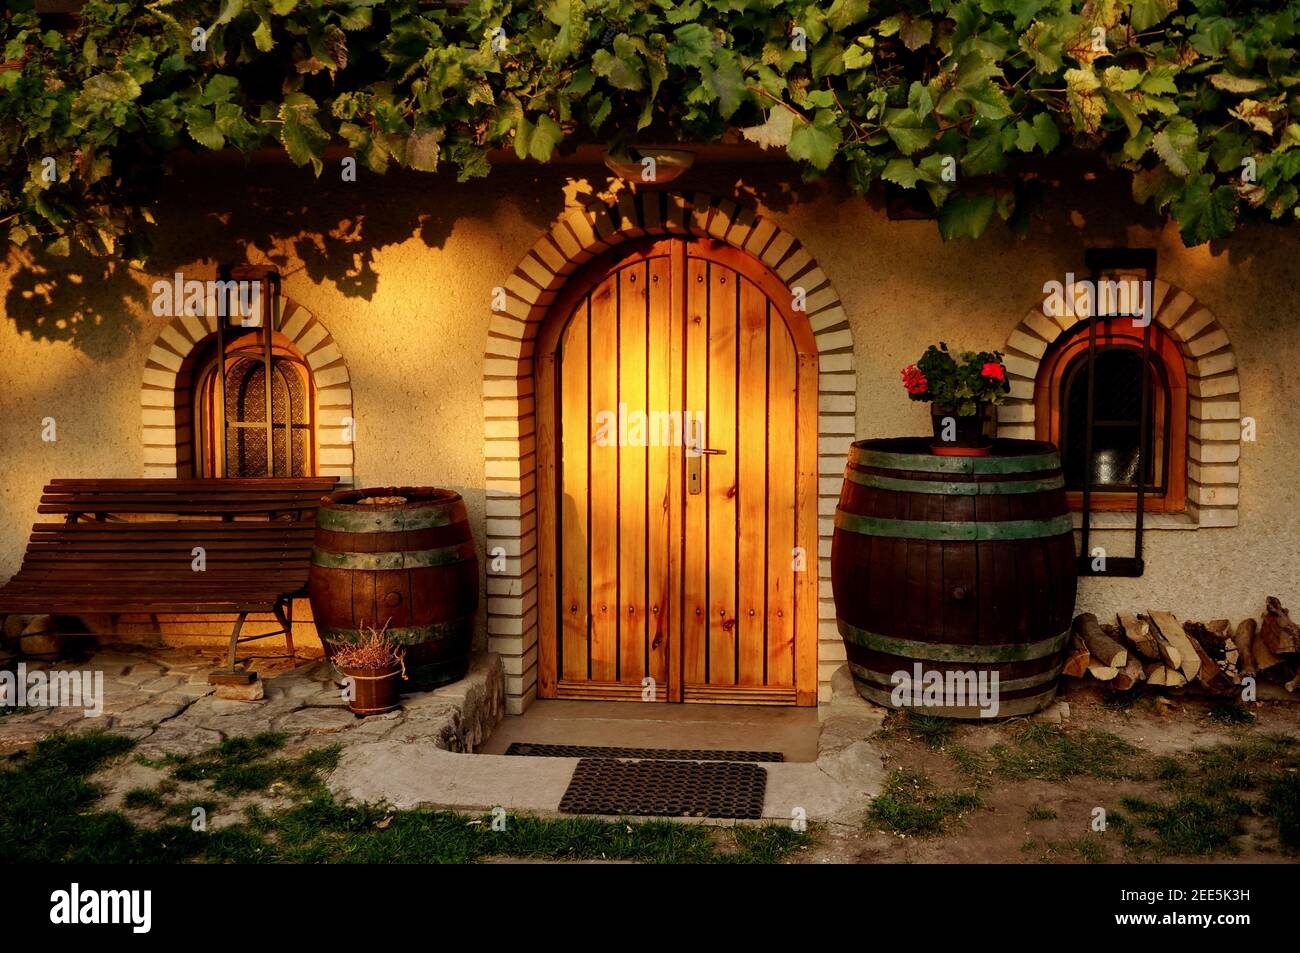 Entrance of a traditional wine cellar with vine on the roof in Pálava region in a warm evening light - Czech republic, Europe Stock Photo